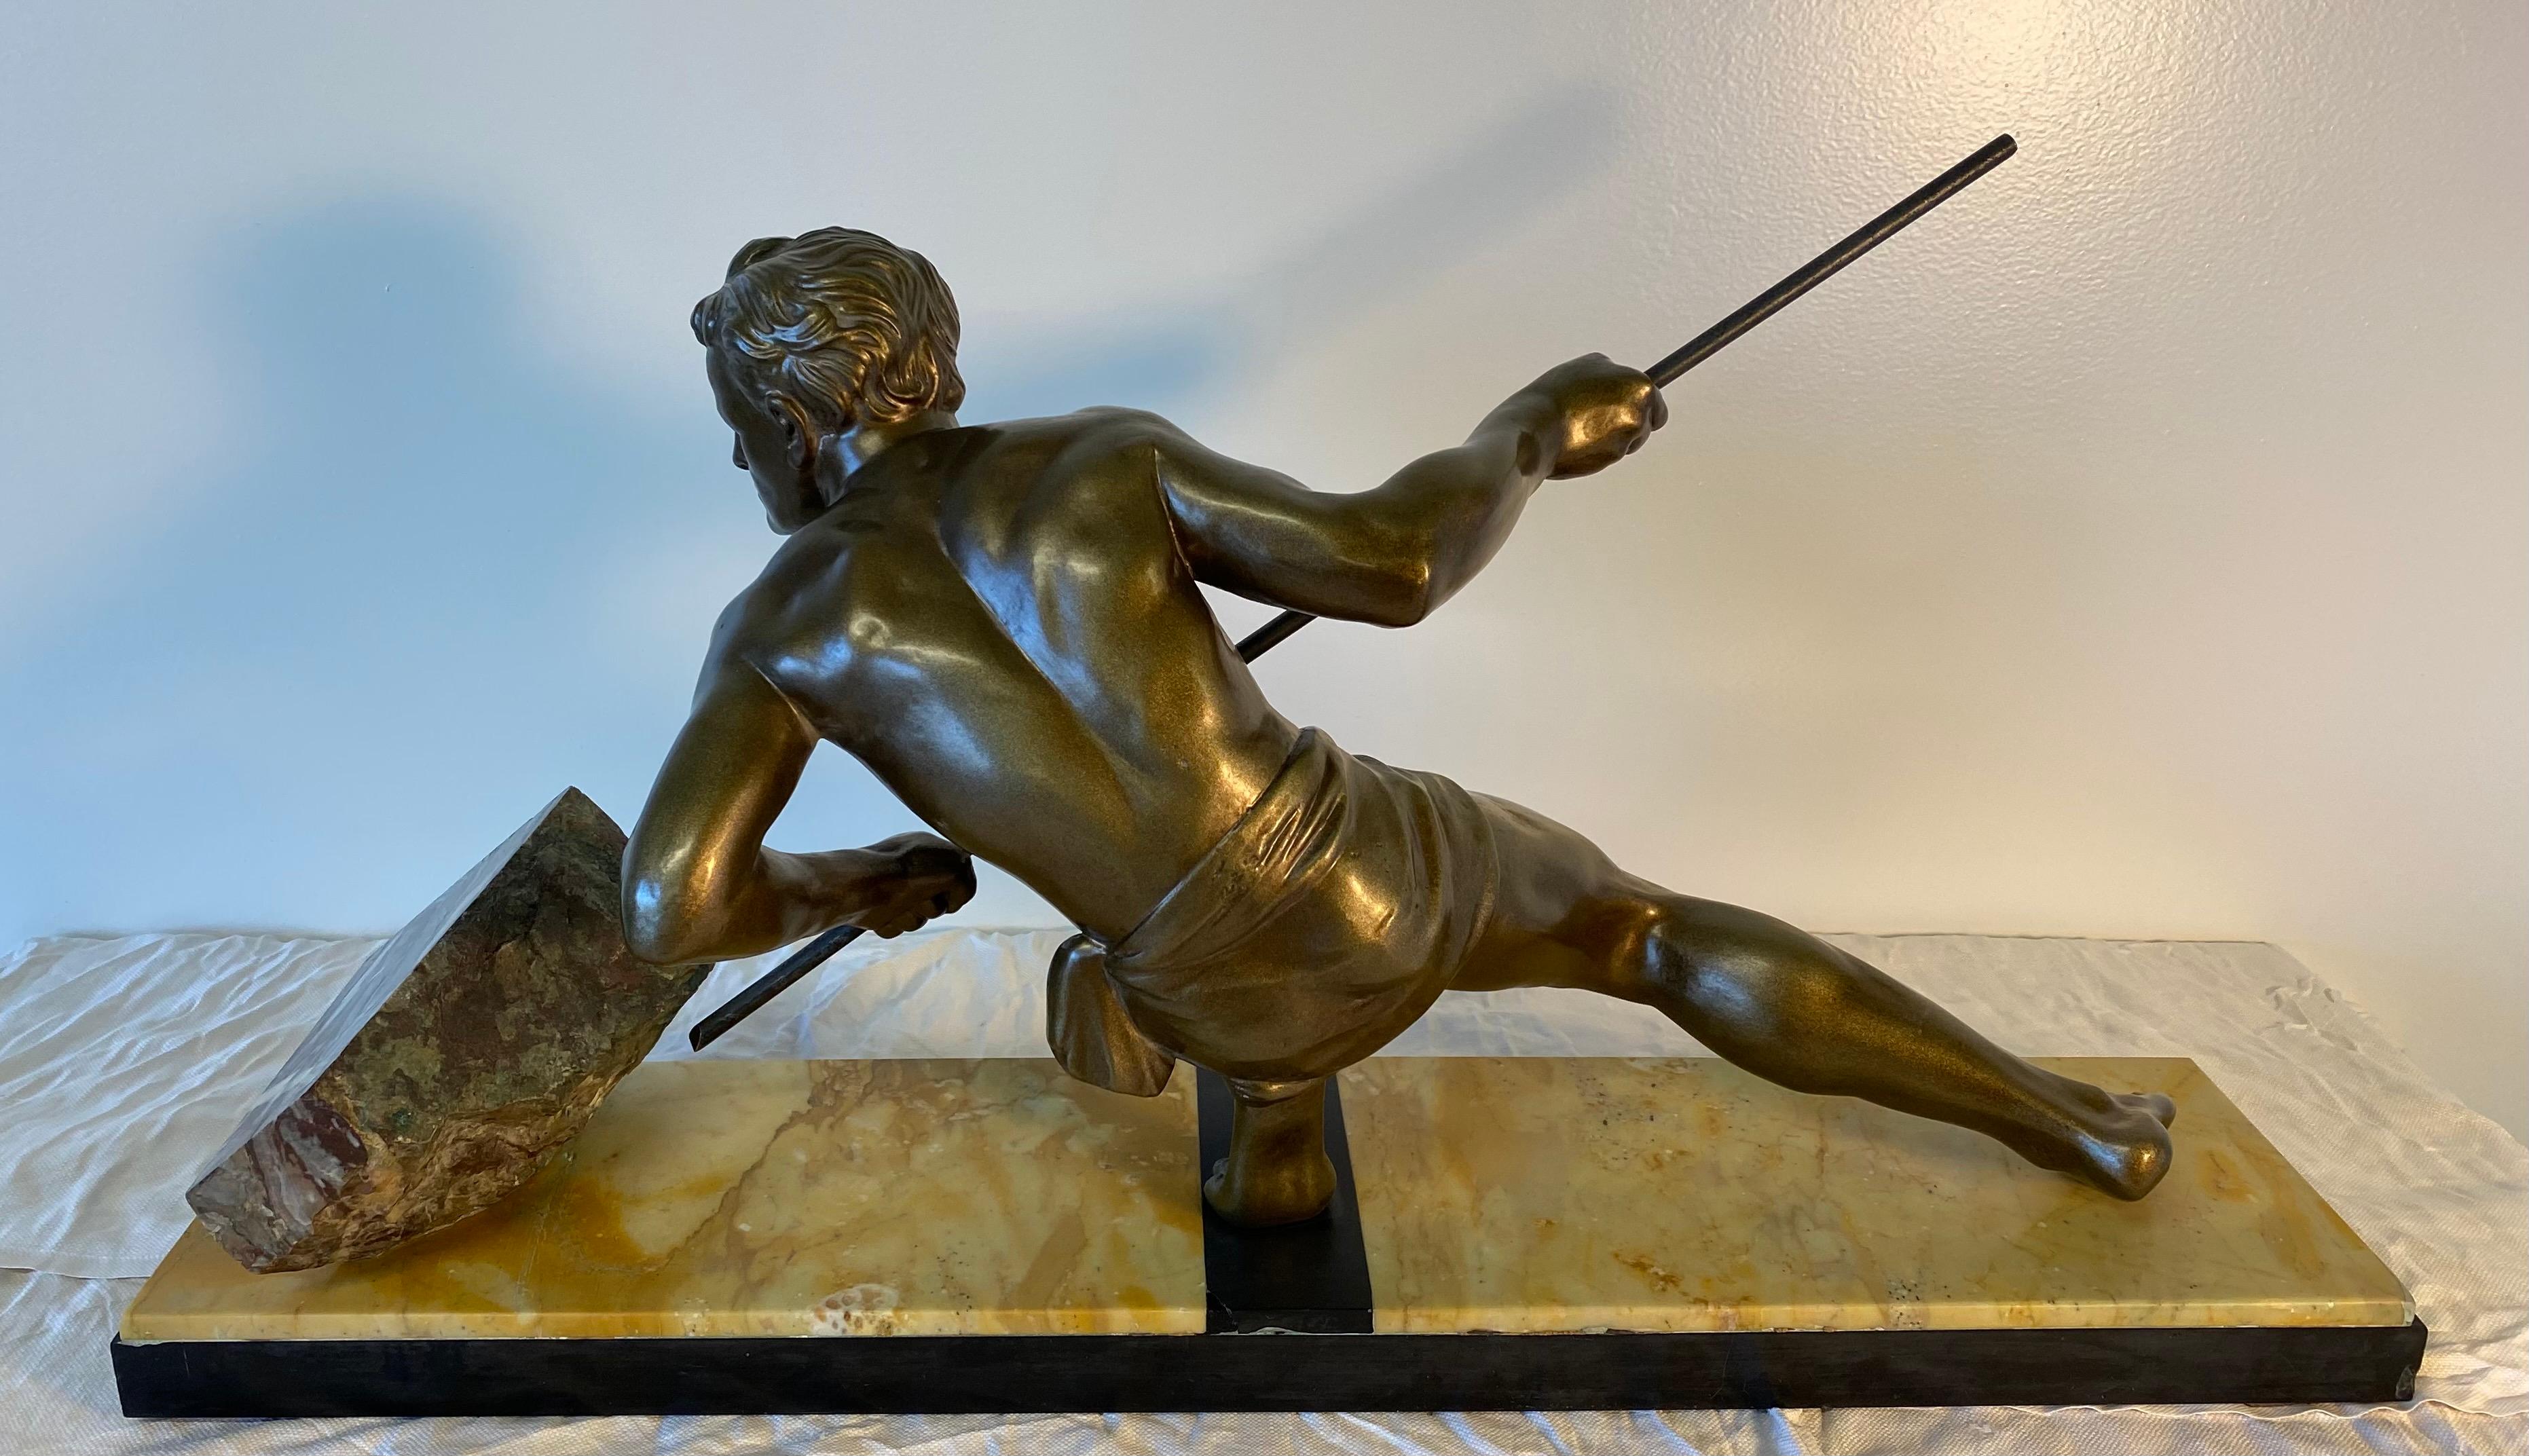 Mid-20th Century French Art Deco Sculpture by Uriano, 1930s For Sale